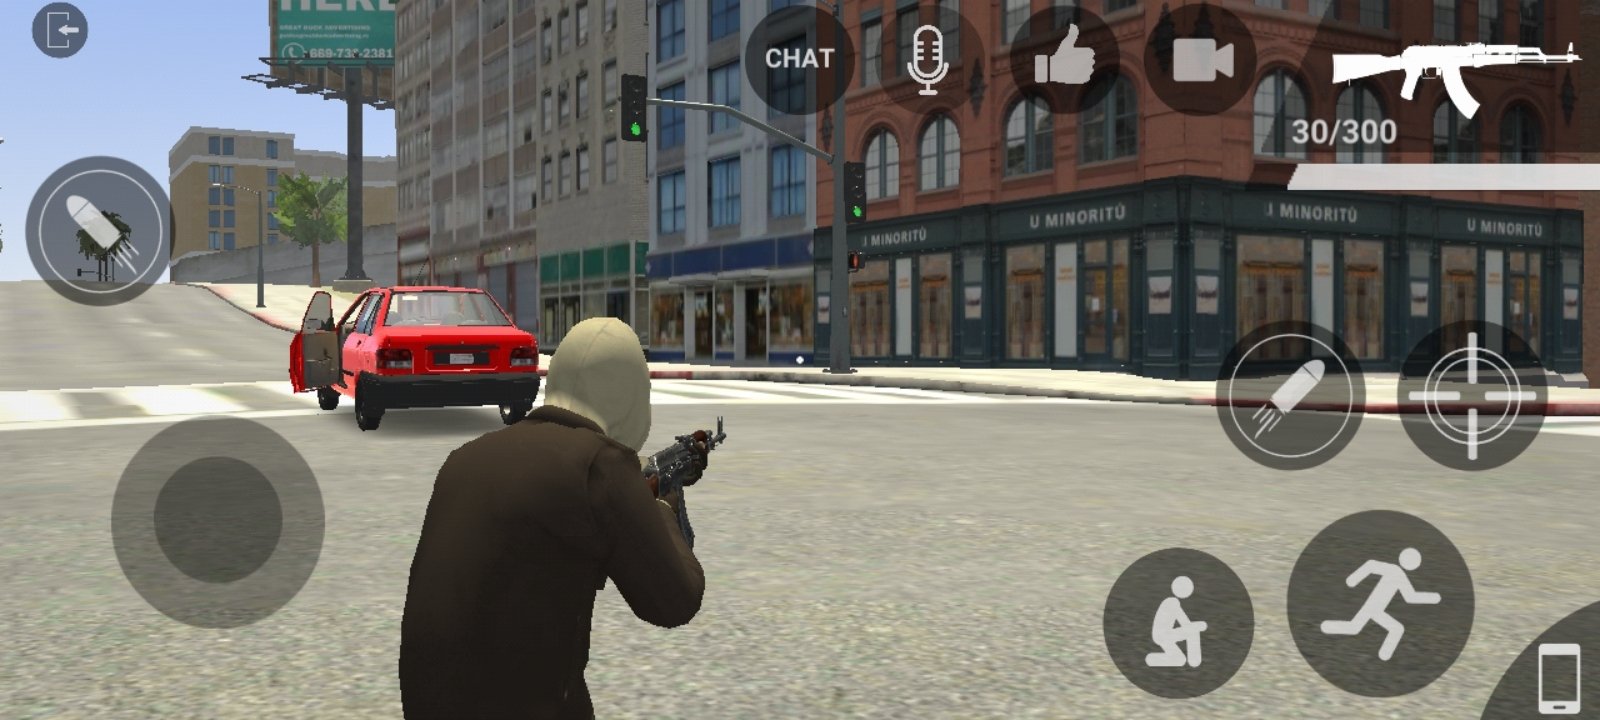 gta v los angeles crimes beta apk 1.9 download for android